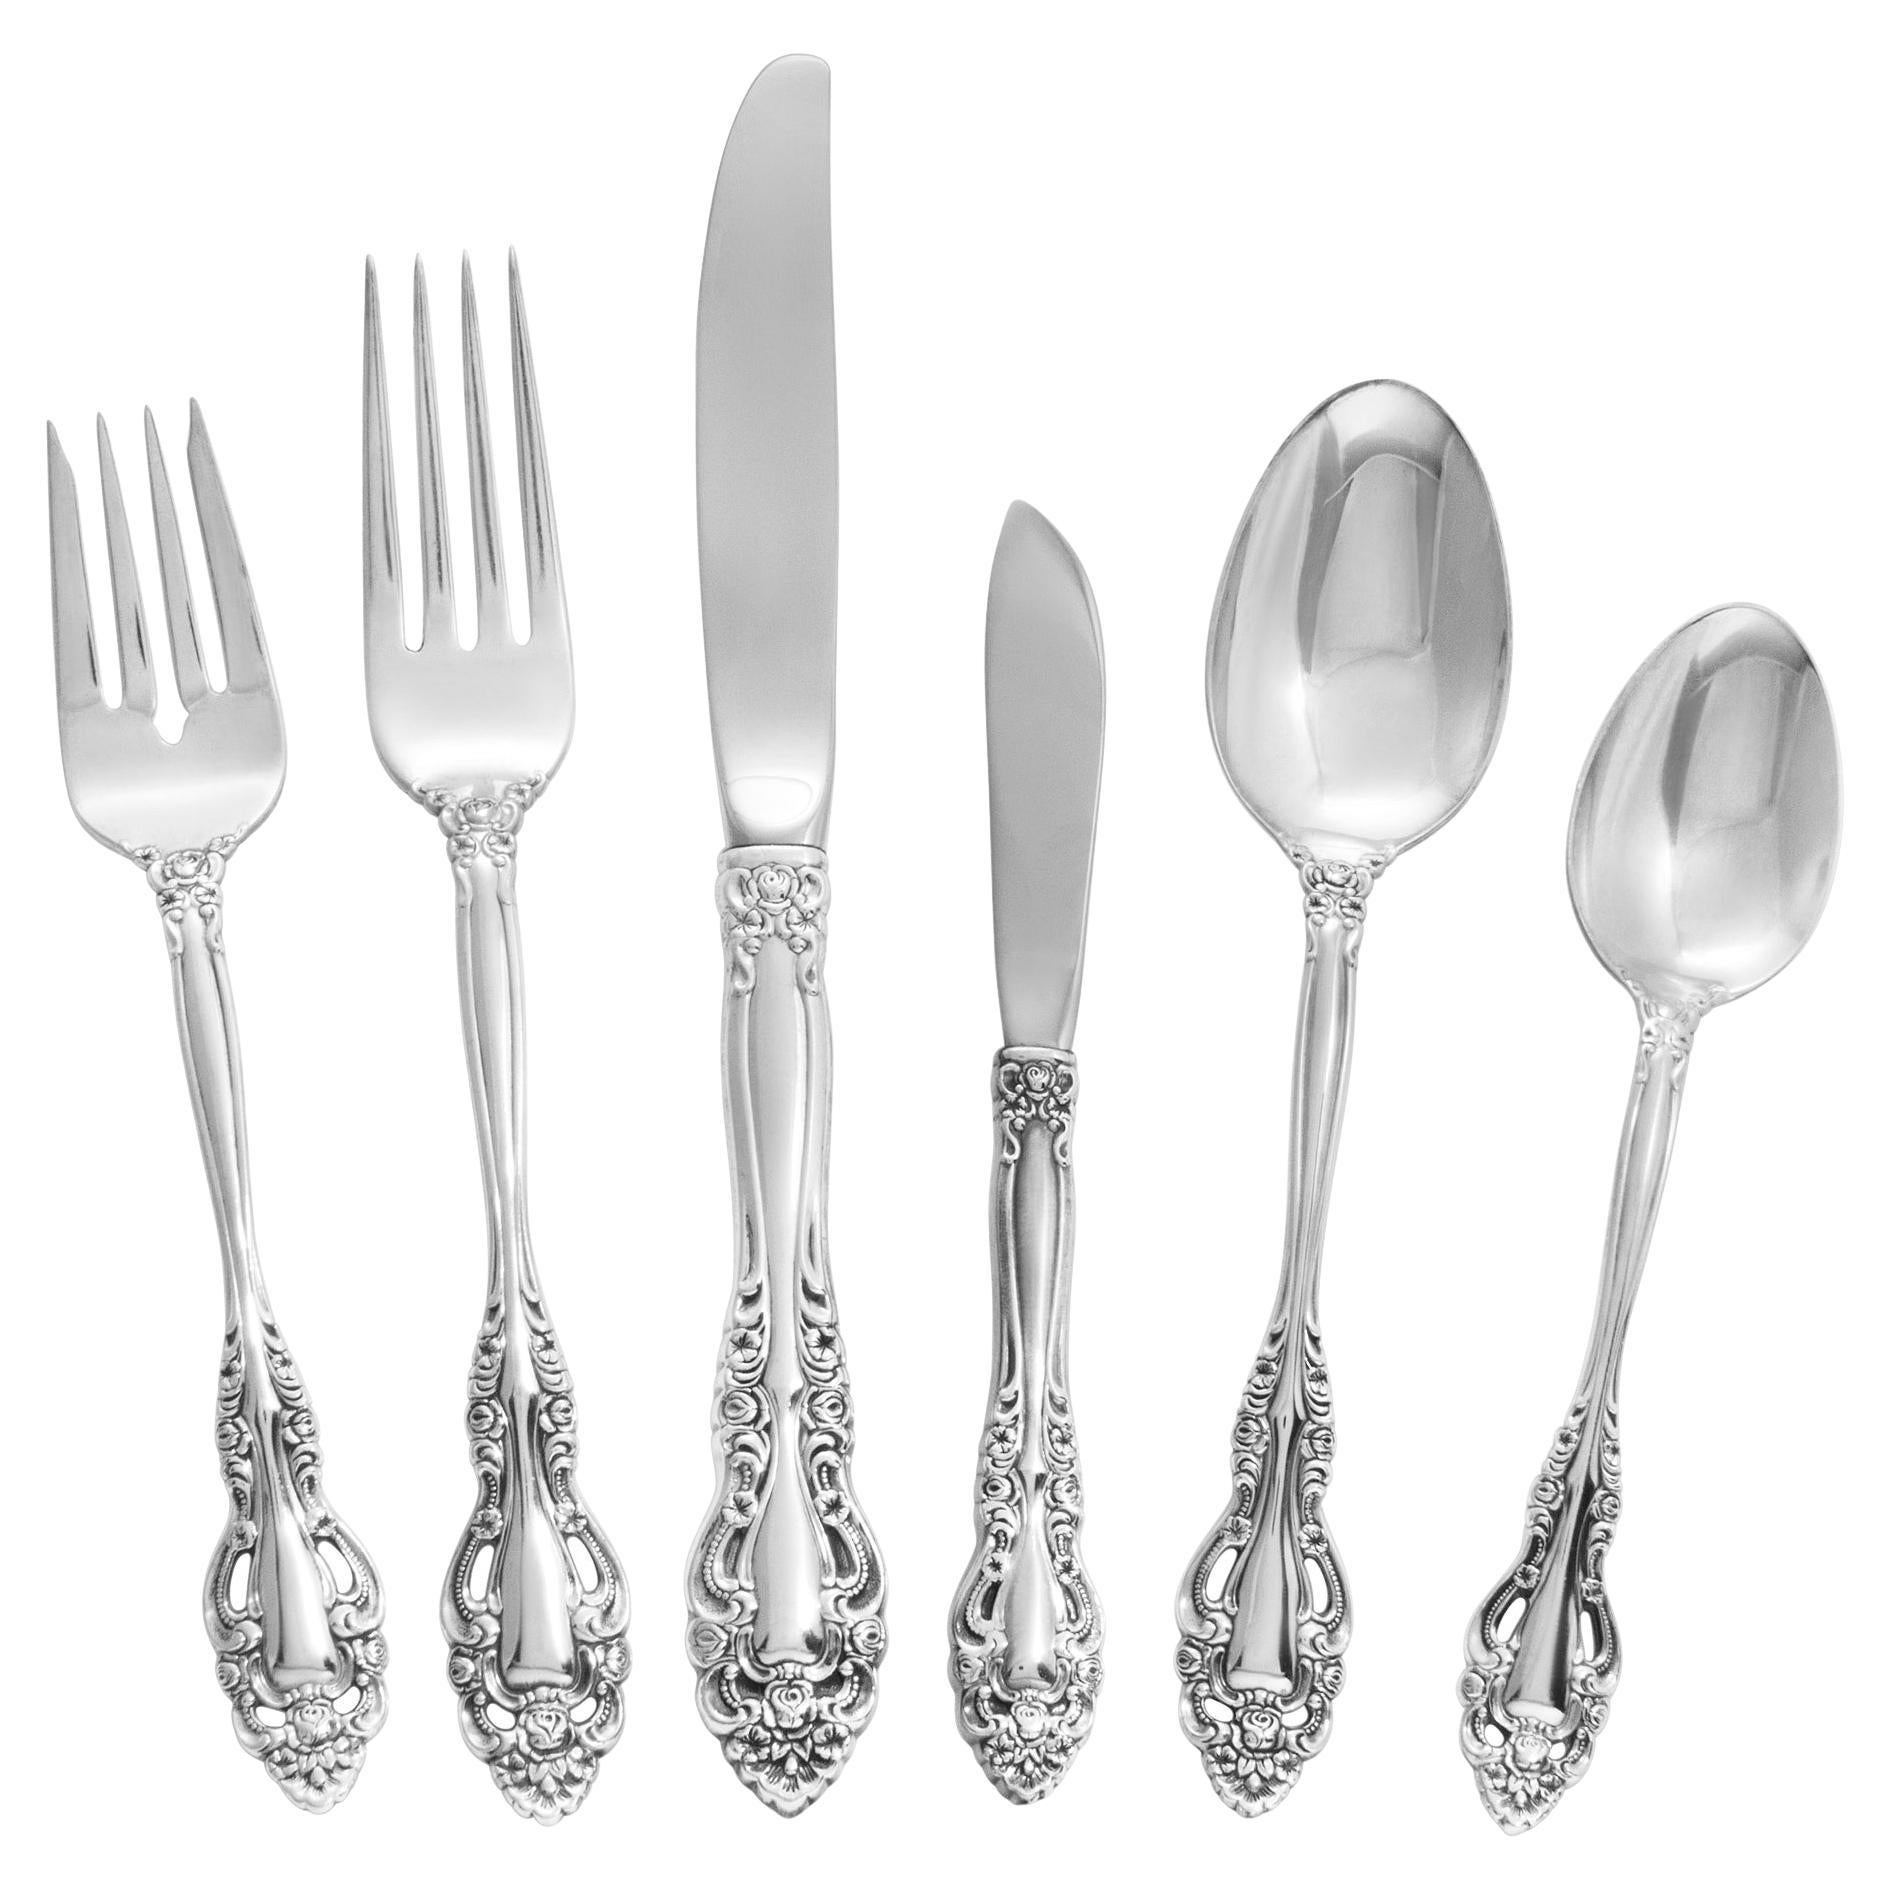 Charmaine Sterling Silver Flatware Set Ptd 1979 by International, 6 Place Set For Sale